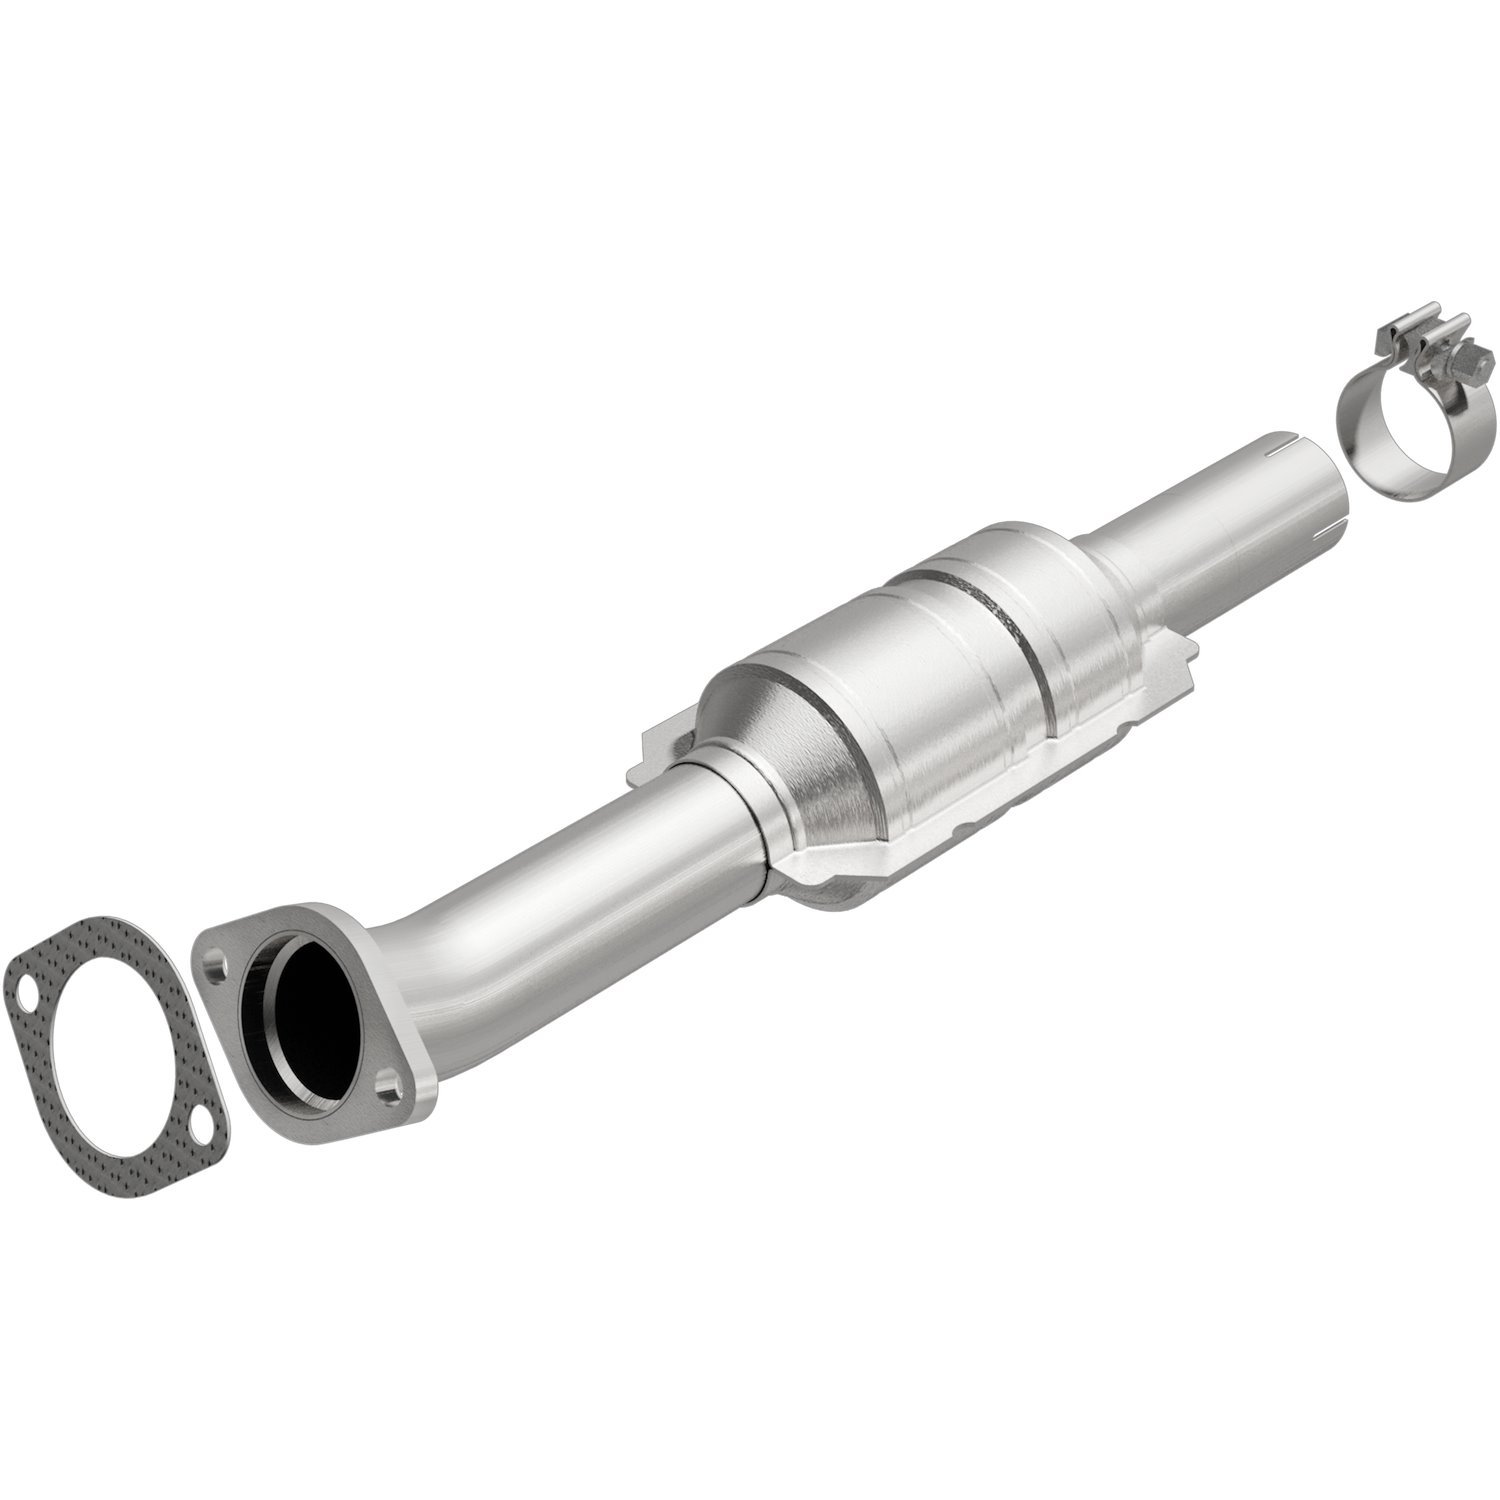 2006-2009 Mitsubishi Eclipse OEM Grade Federal / EPA Compliant Direct-Fit Catalytic Converter